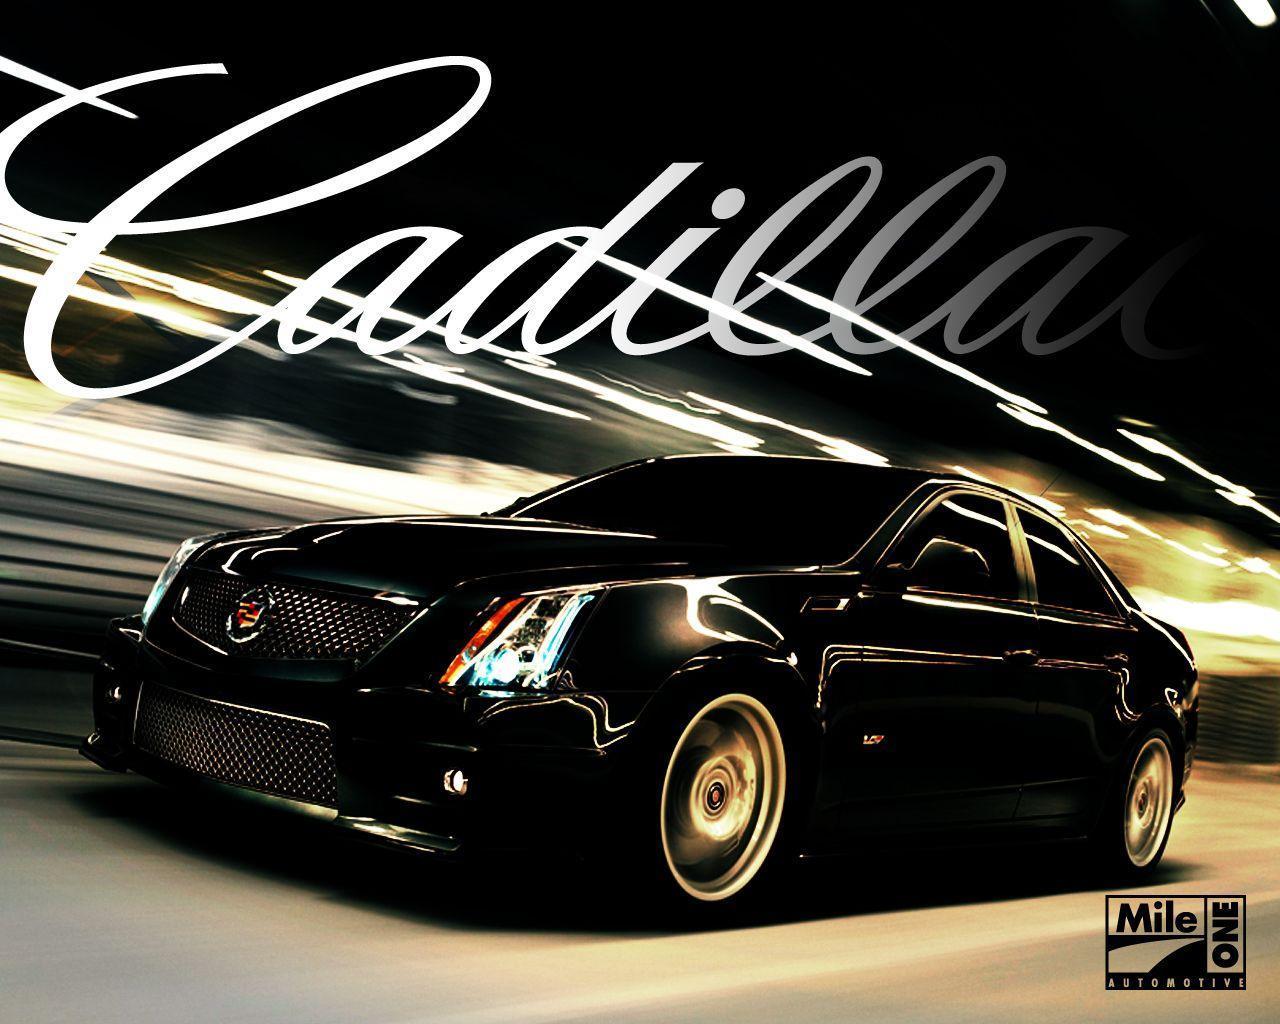 Cadilac Wallpapers Top Free Cadilac Backgrounds Wallpaperaccess